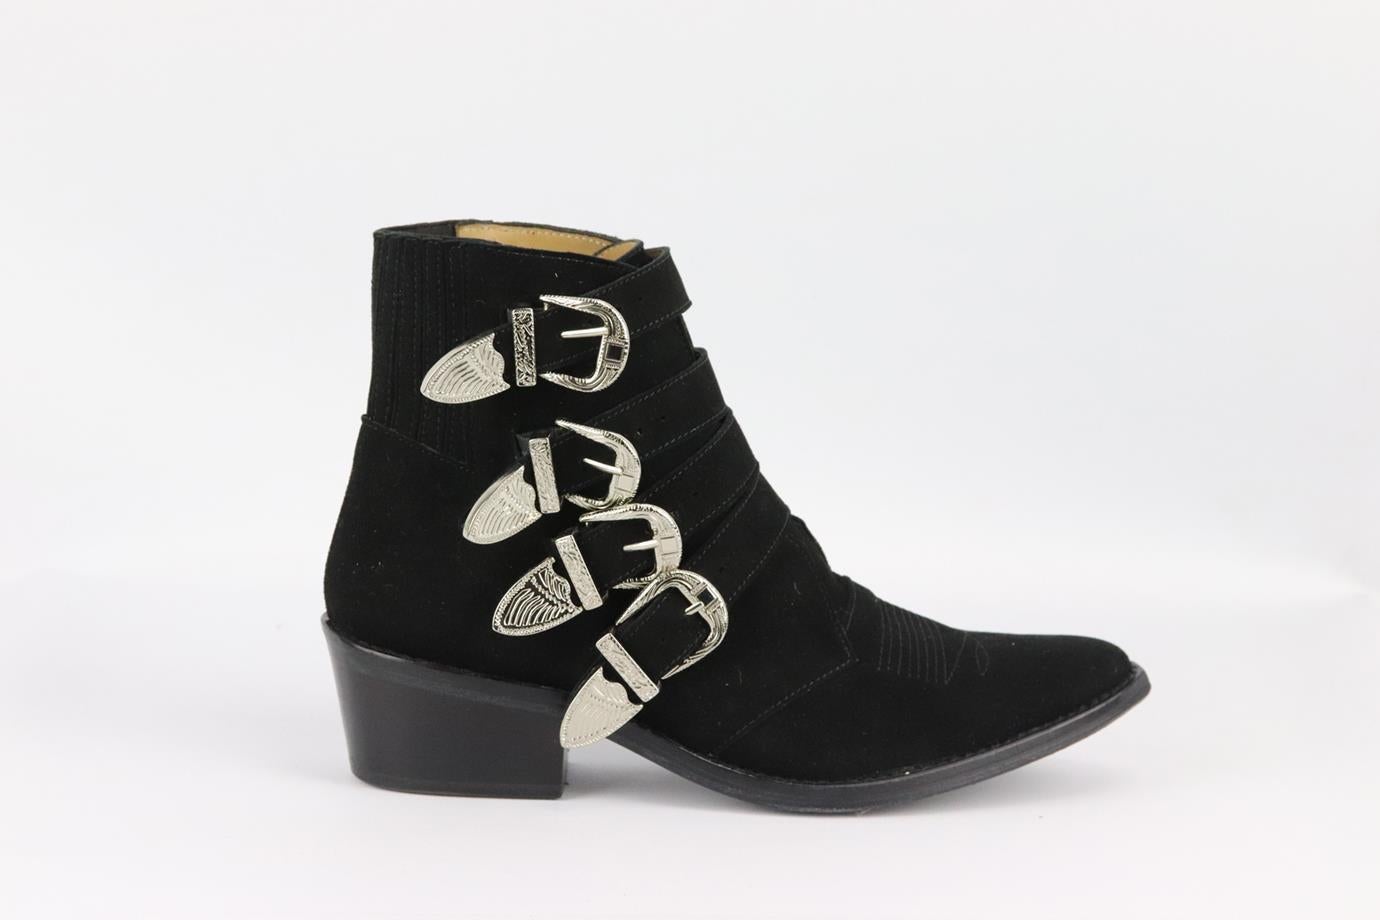 Toga Pulla buckled suede ankle boots. Black. Buckle fastening at side. Does not come with dustbag and box. Size: EU 39 (UK 6, US 9). Insole: 10.4 in. Shaft: 5 in. Heel: 2 in. Very good condition - Light wear to soles; see pictures.